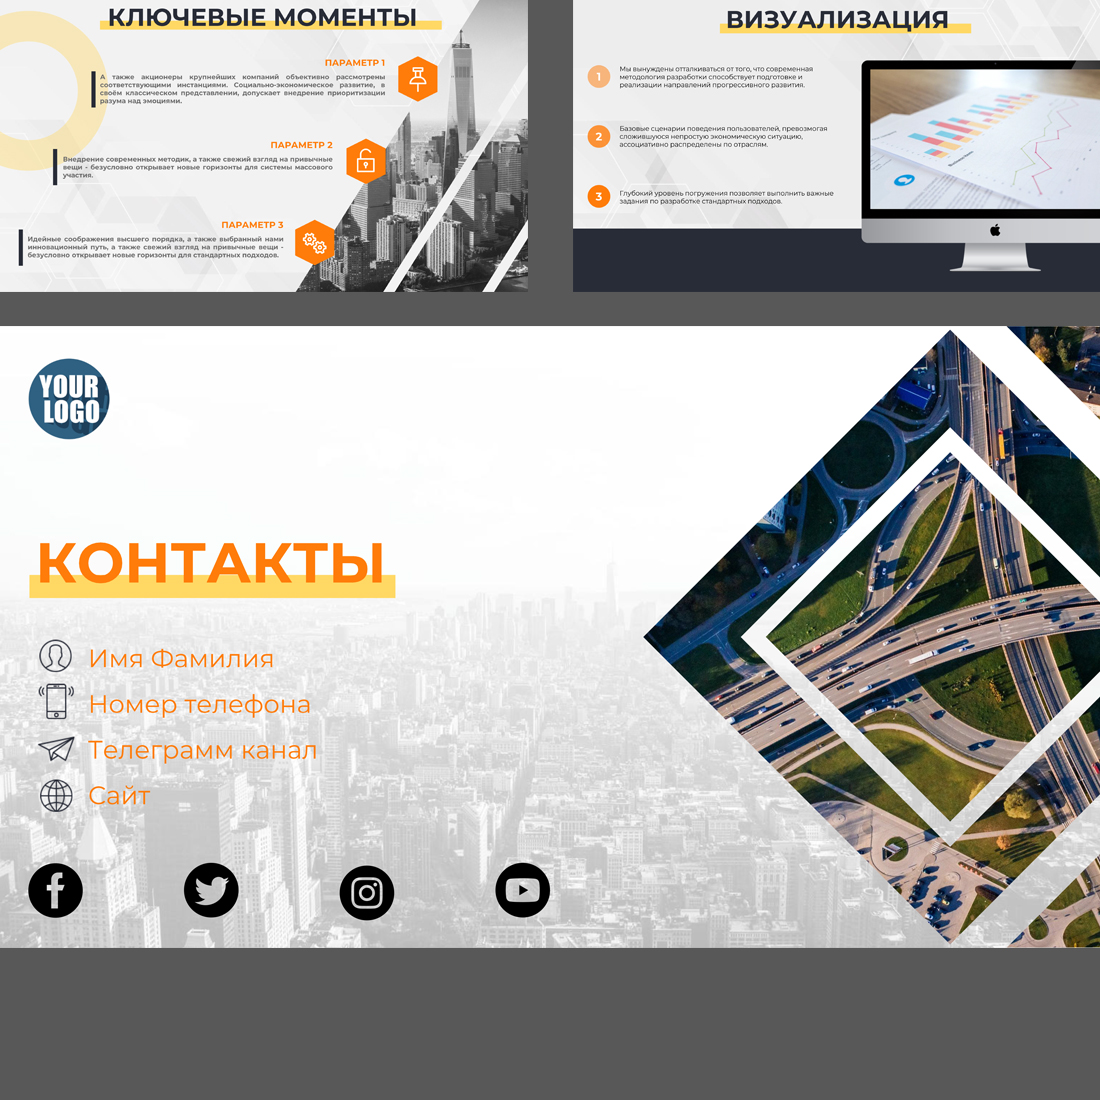 Business Powerpoint Template.